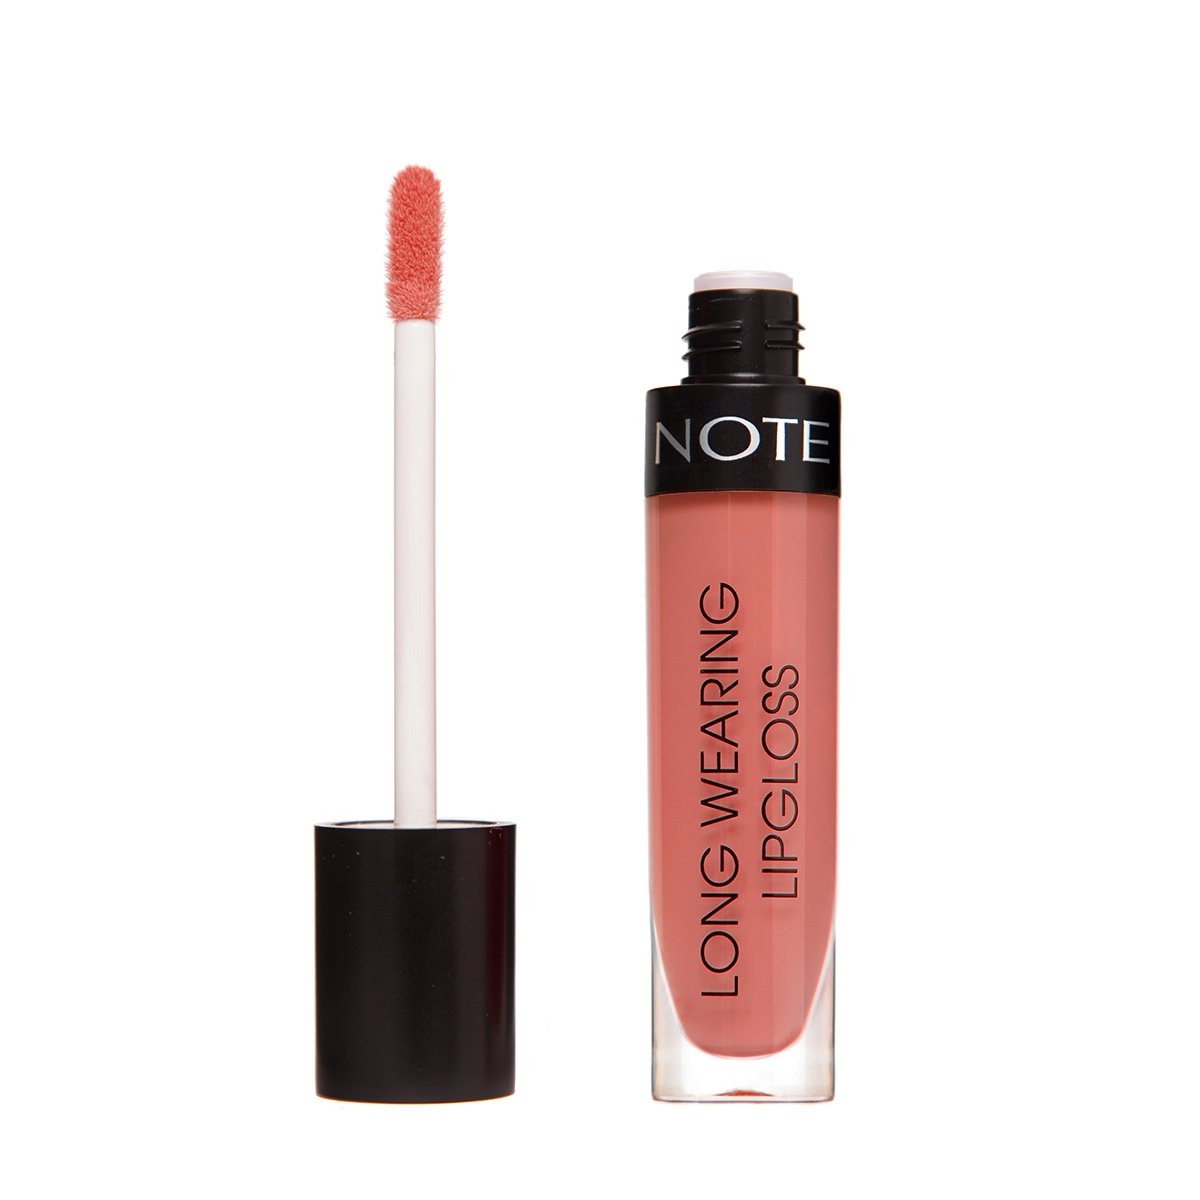 NOTE LONG WEARING LIPGLOSS - 05 CREAM CUP - Halal Lipgloss, Vegan Lipgloss, Cruelty Free Lipgloss, Paraben Free Lipgloss, Hydrating, Long Lasting, Nourishing, Intense Colour